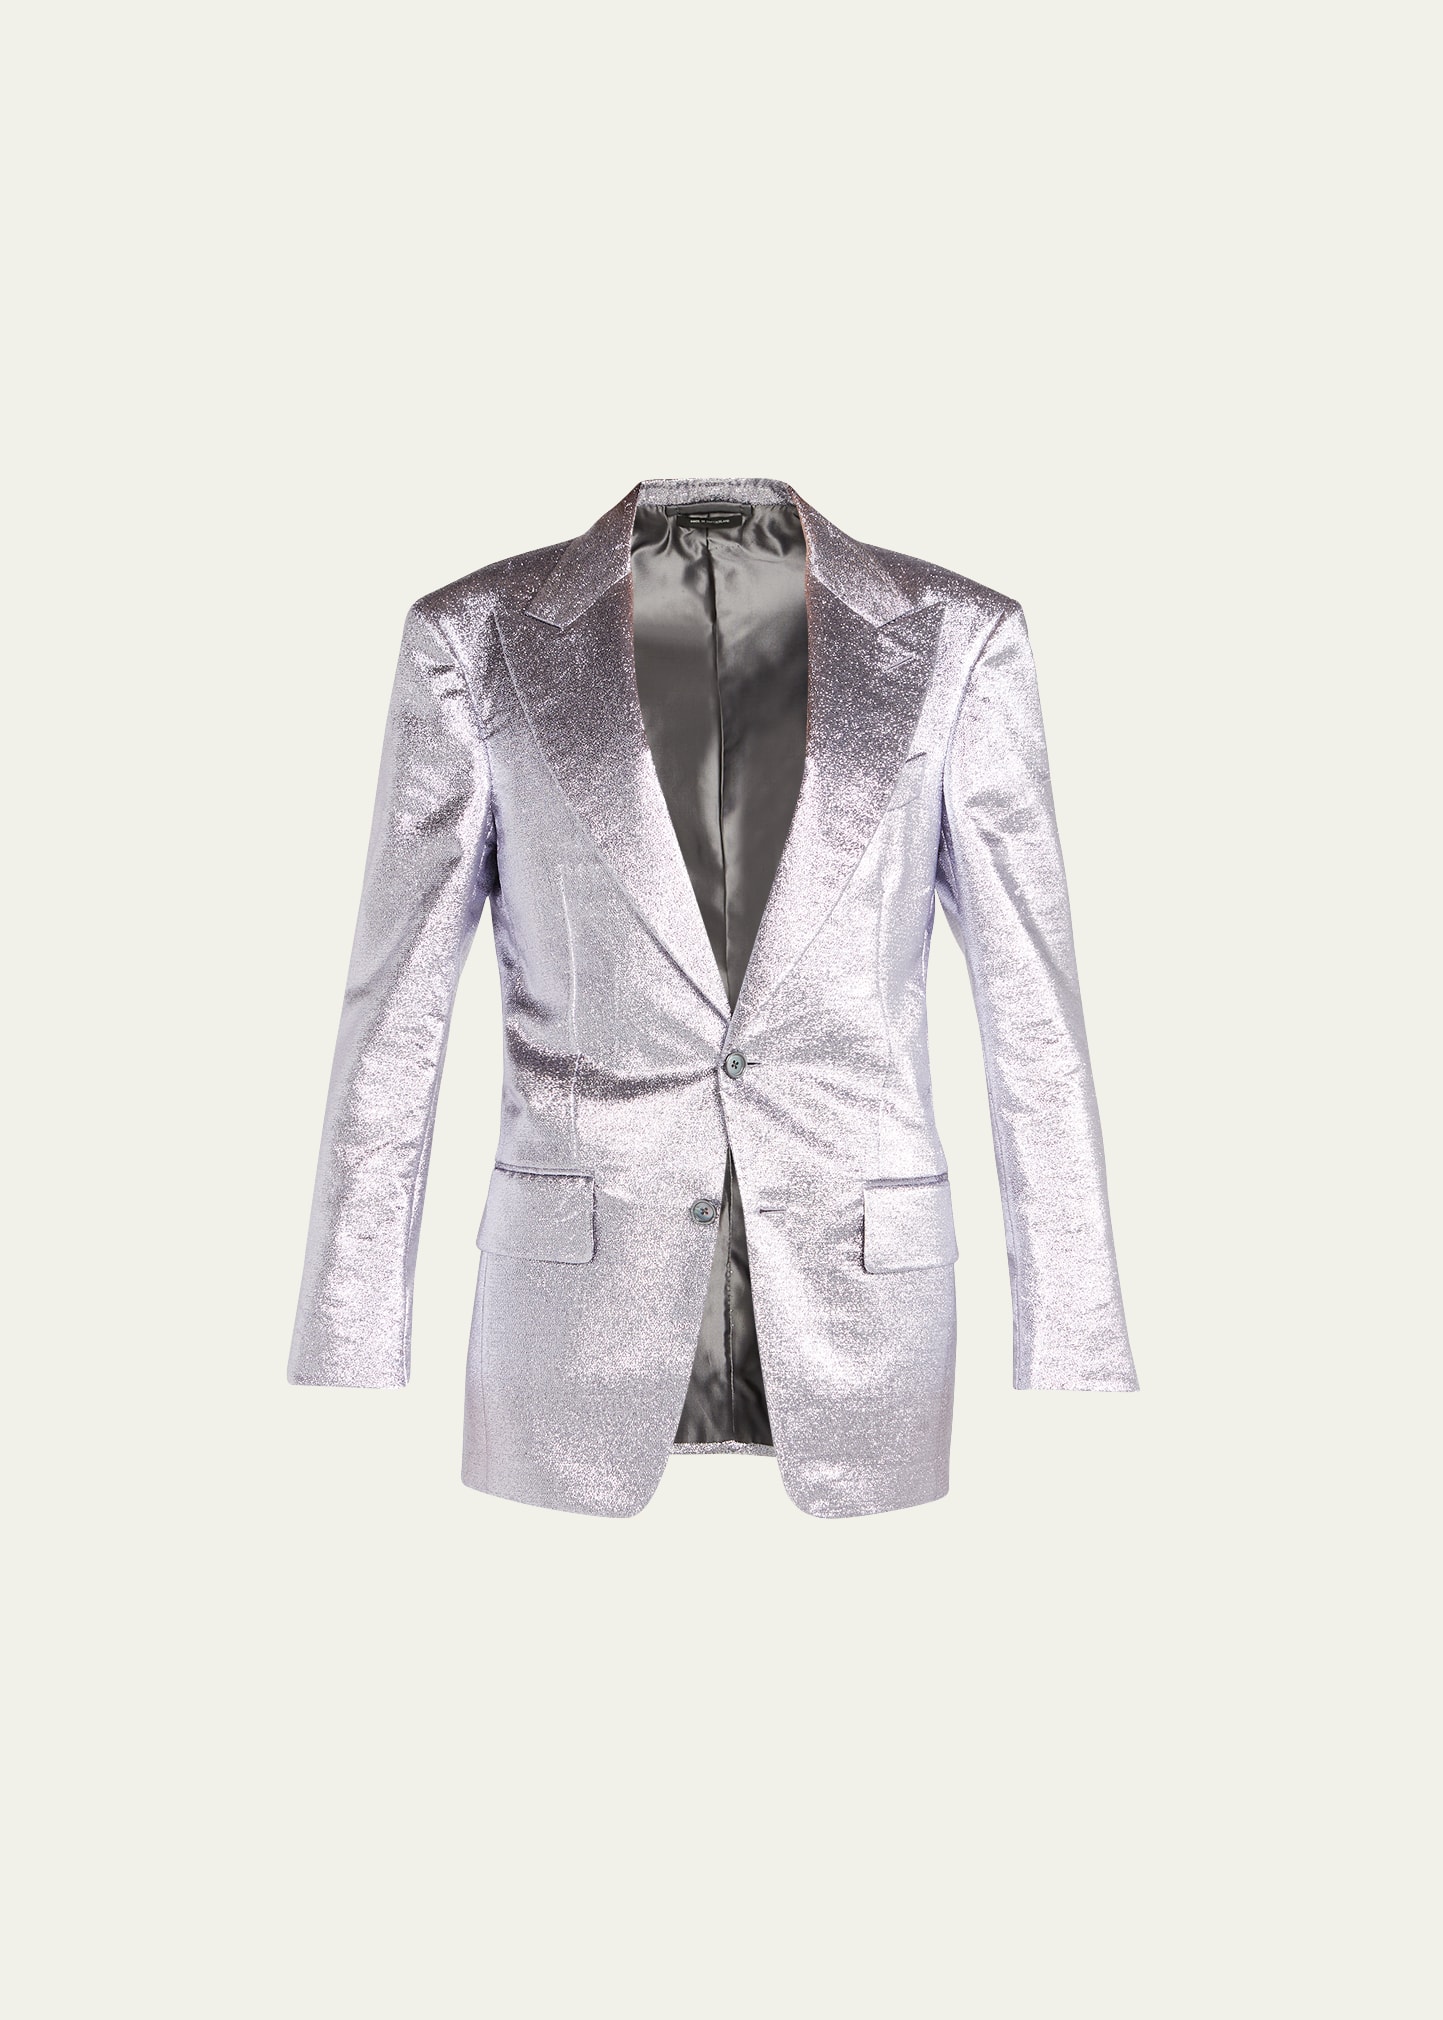 TOM FORD IRIDESCENT SABLE TAILORED JACKET